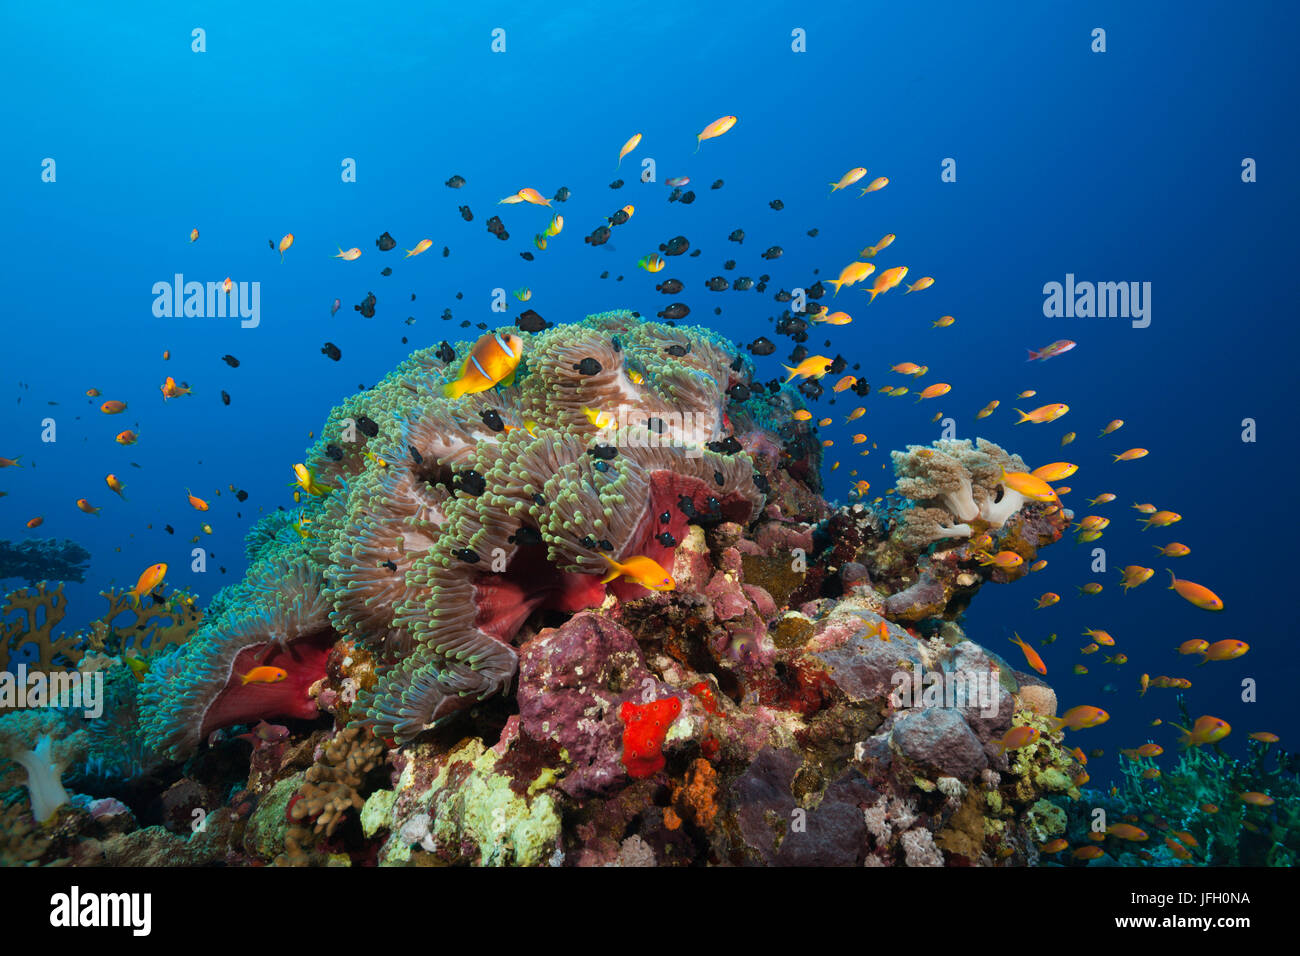 Rotes Meer Anemonenfische im Riff, Amphiprion Bicinctus, Shaab Rumi, Rotes Meer, Sudan Stockfoto